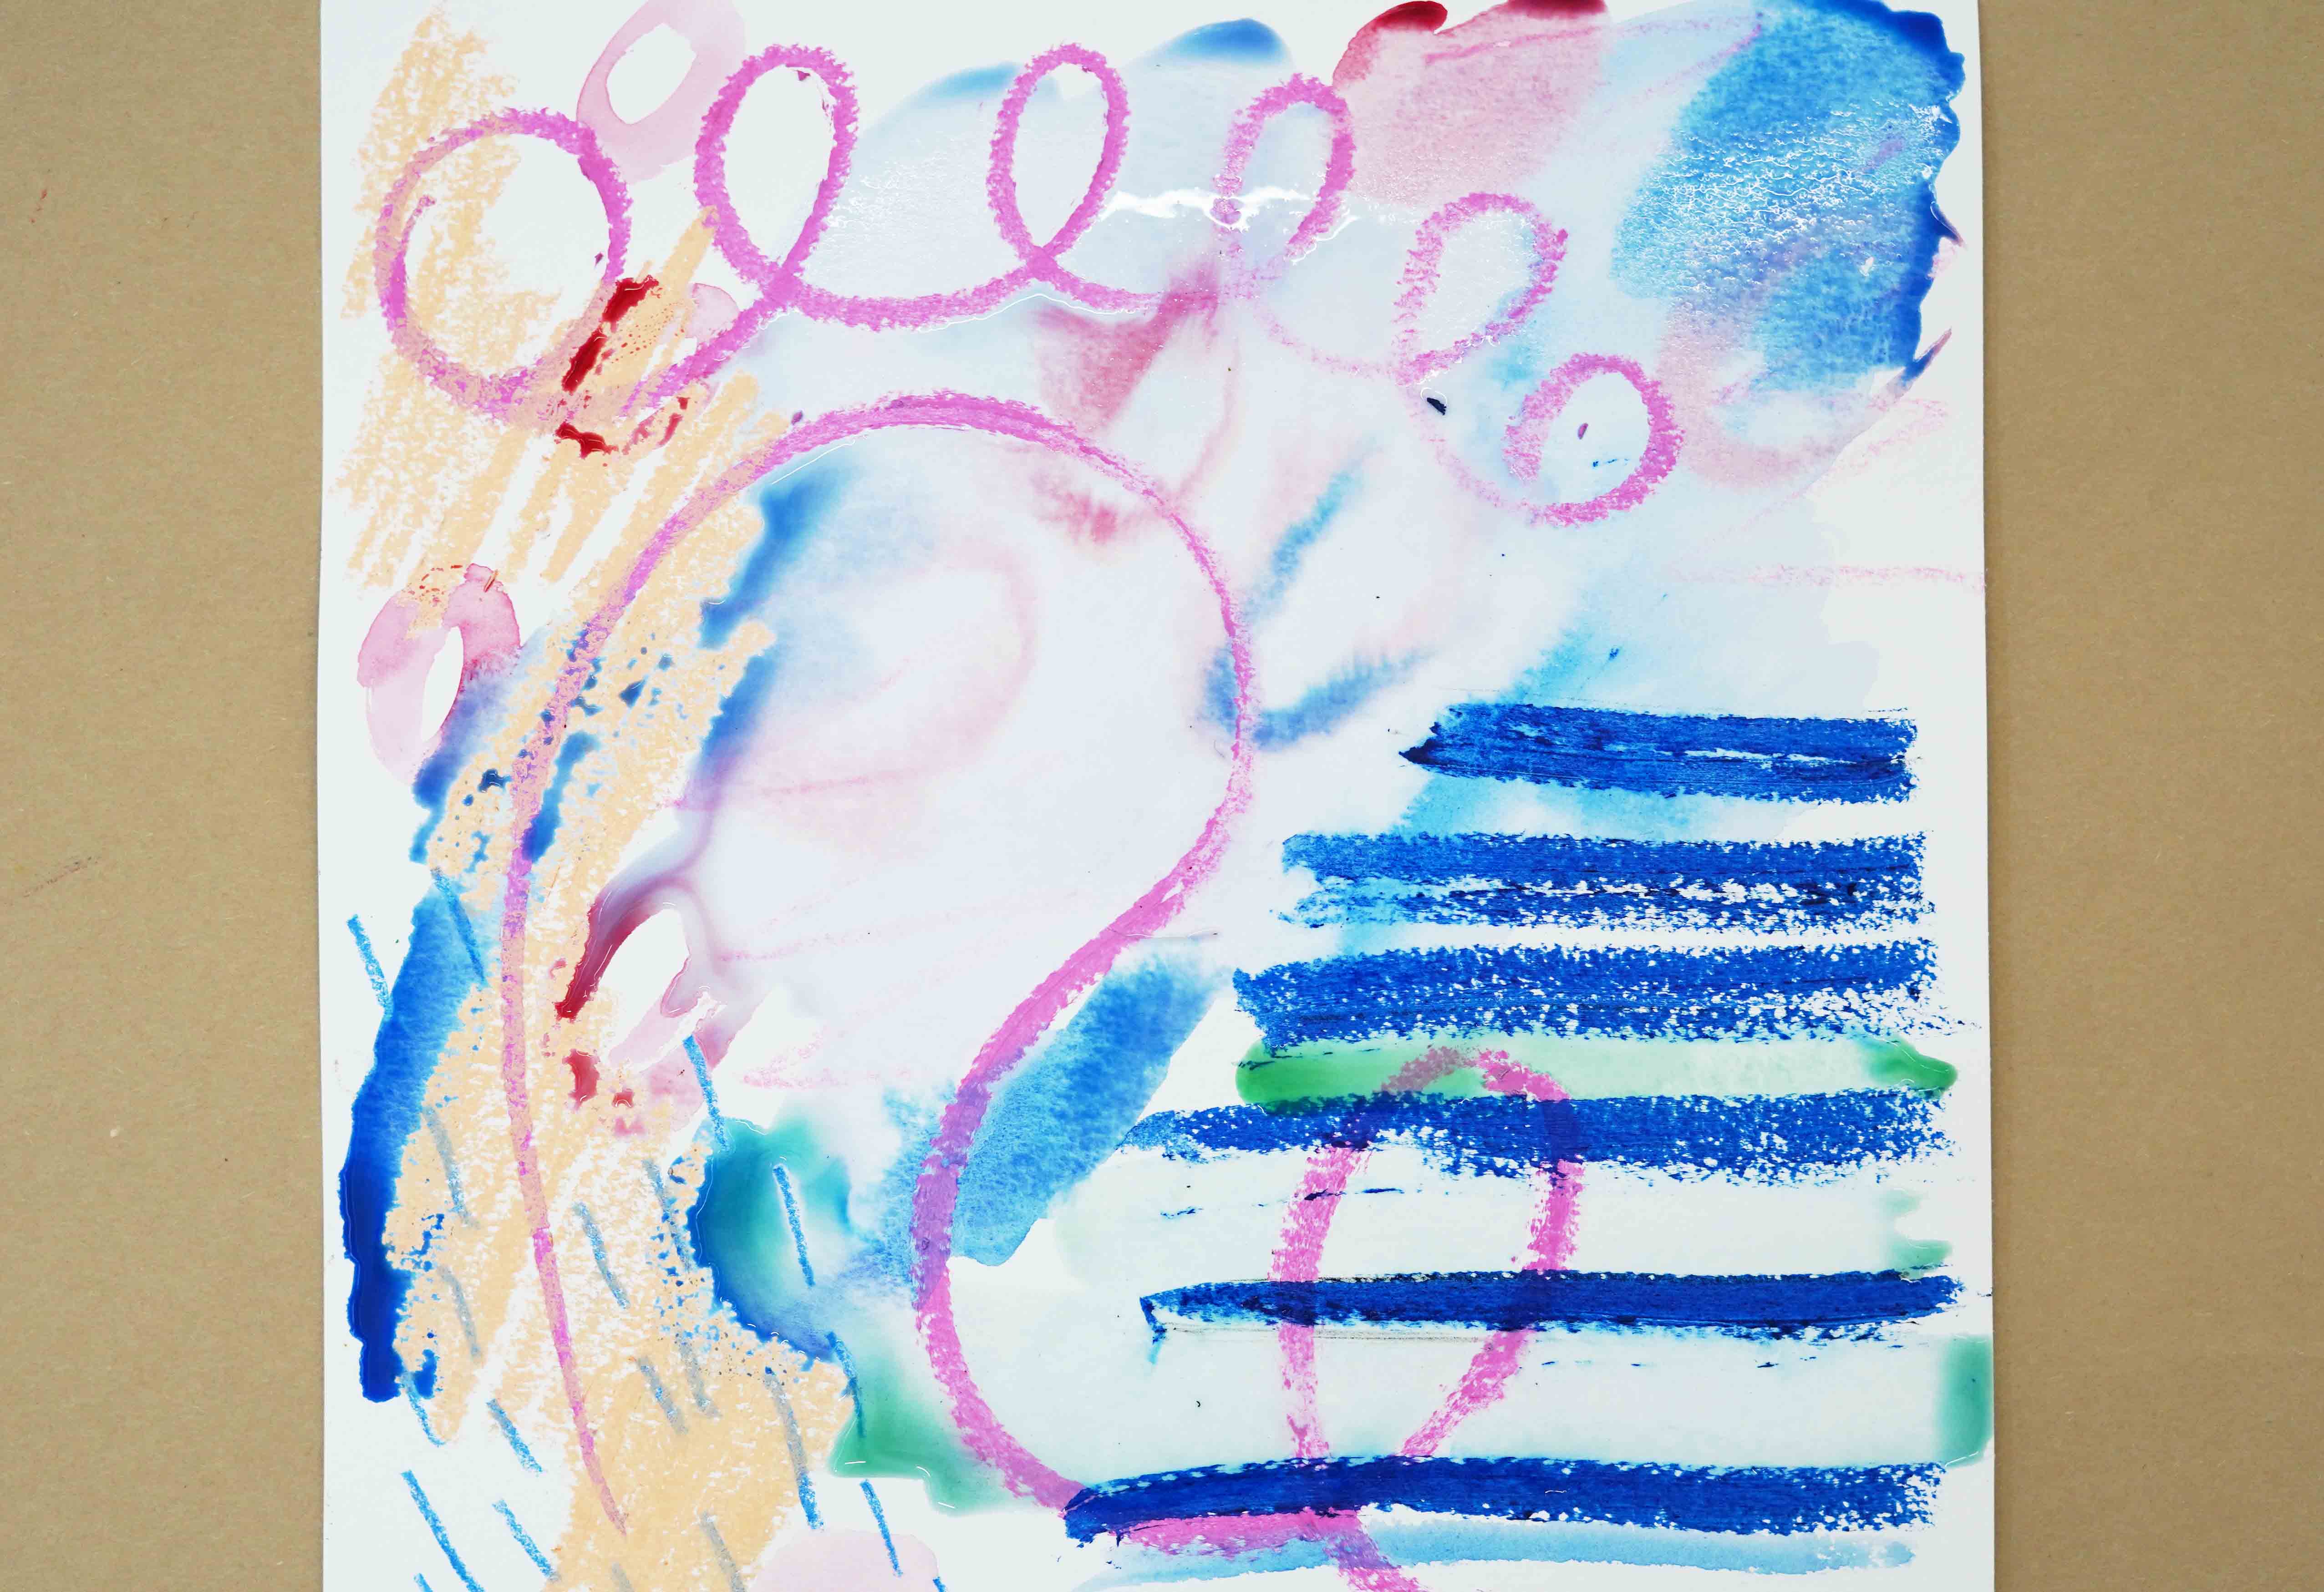 Photo of an abstract artwork with pink squiggles, blue stripes, and blue, green, and orange color fields laying on a surface